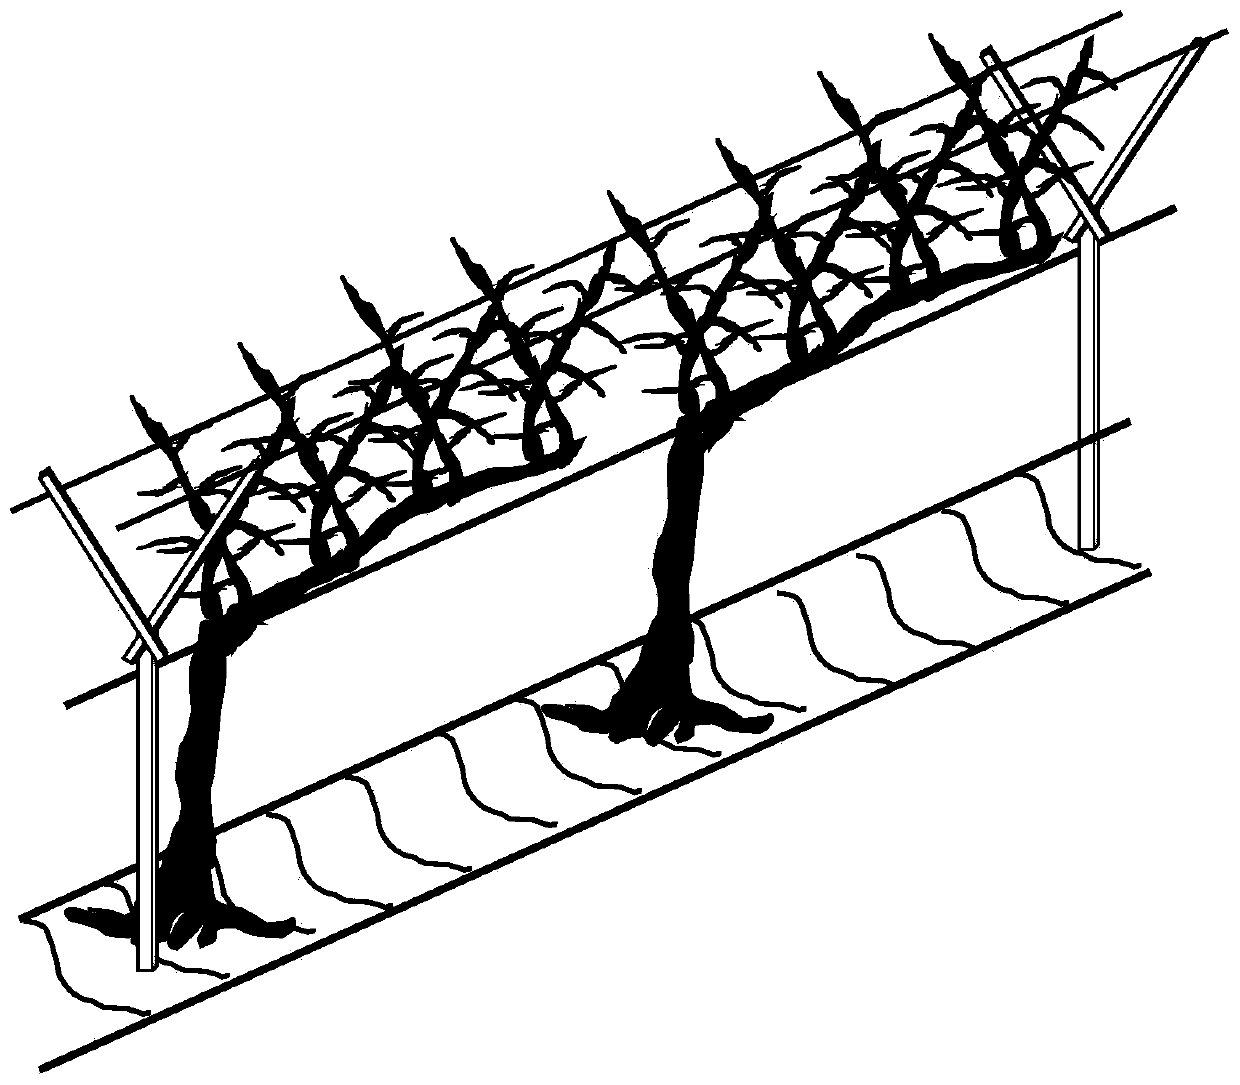 Peach tree shaping and pruning method